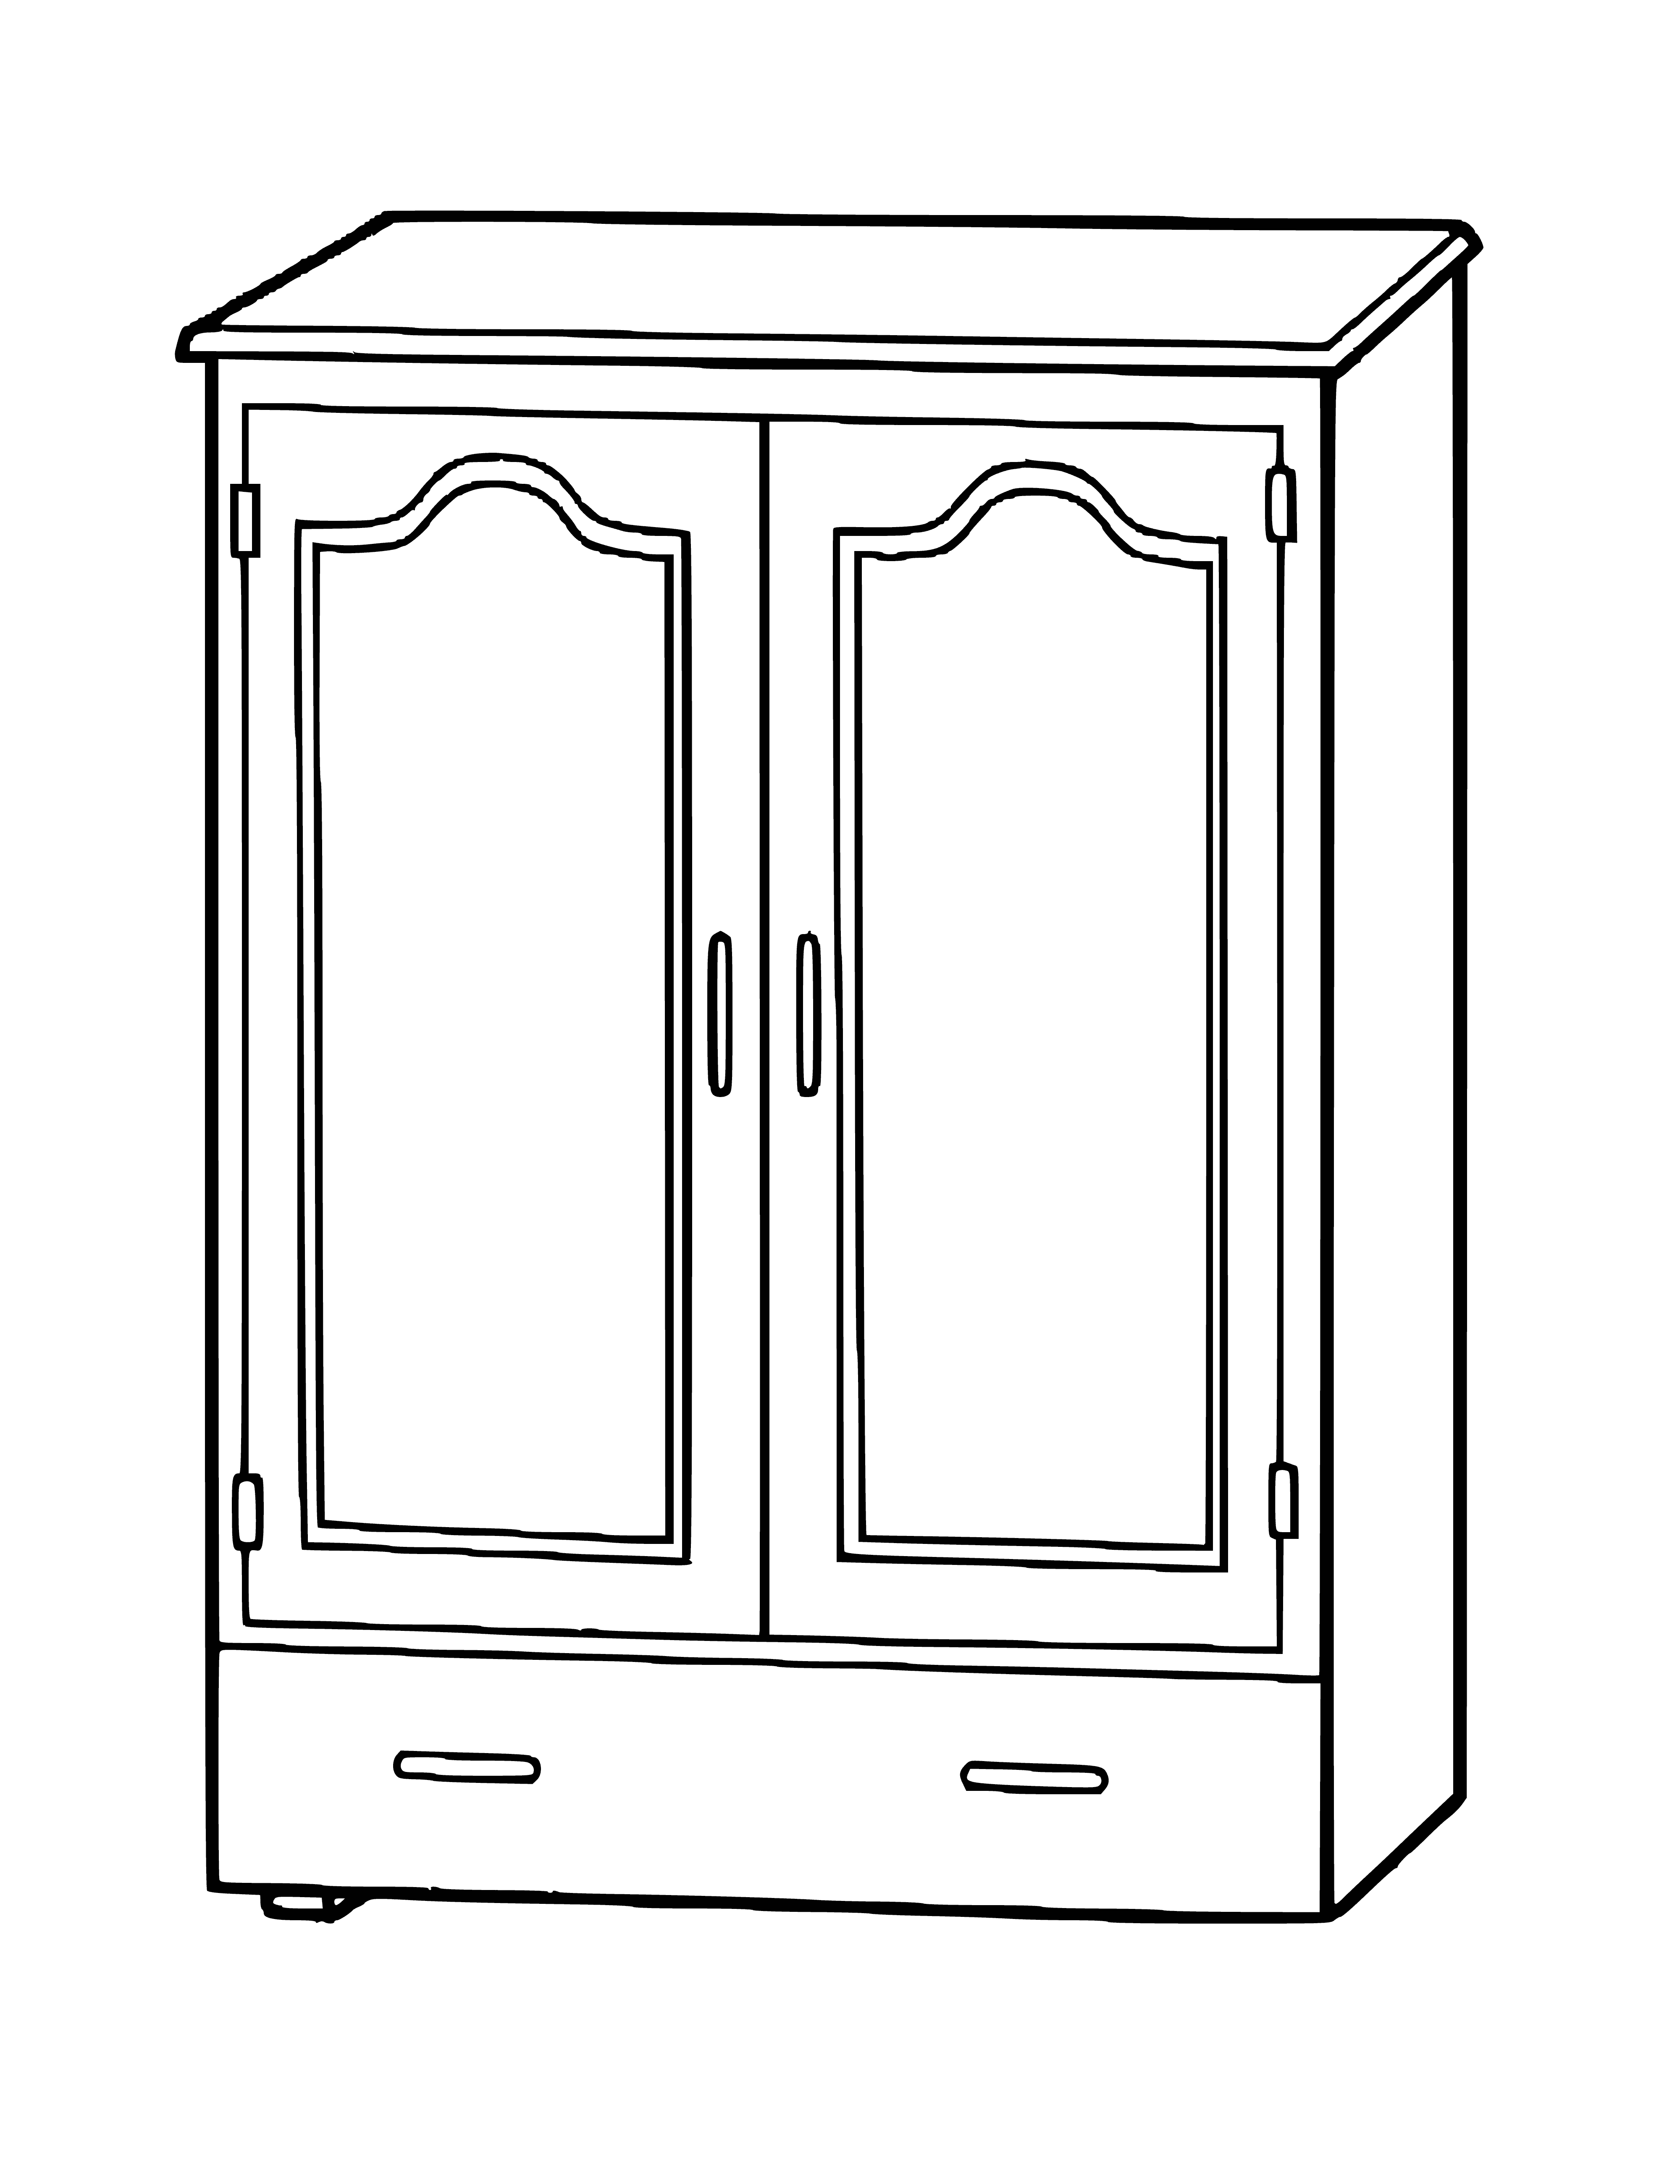 coloring page: Dark wood wardrobe: tall, thin, two doors w/long hanging rod & shelf space.